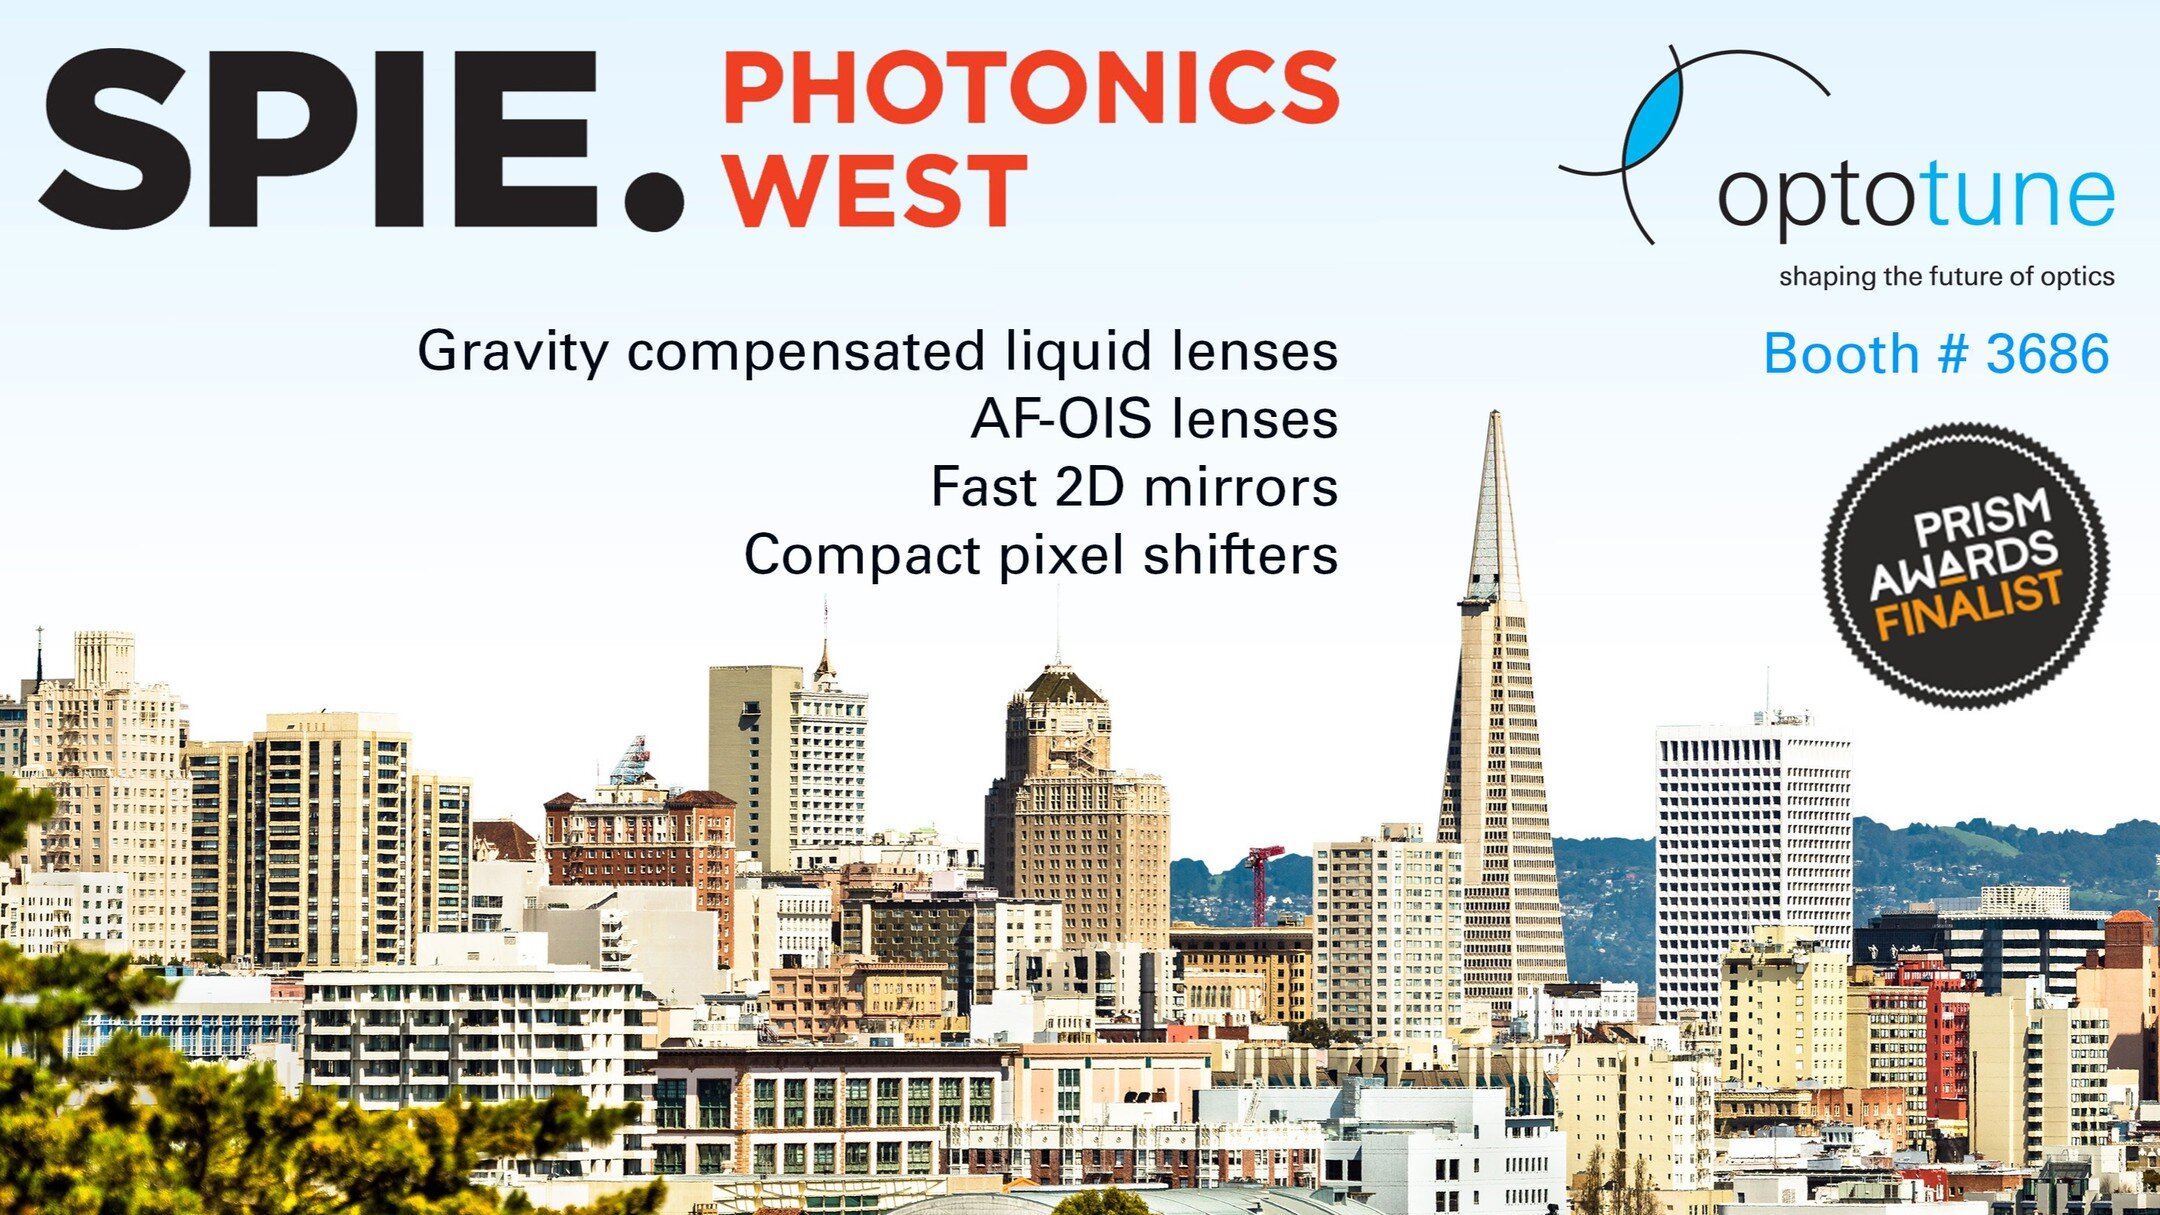 Visit Optotune at SPIE Photonics West from January 30 to February 1, 2024. The best of new photonics technologies will be on show, including Optotune's Gravity Compensated lenses (selected finalist for the 2024 SPIE Prism Awards). We look forward to 